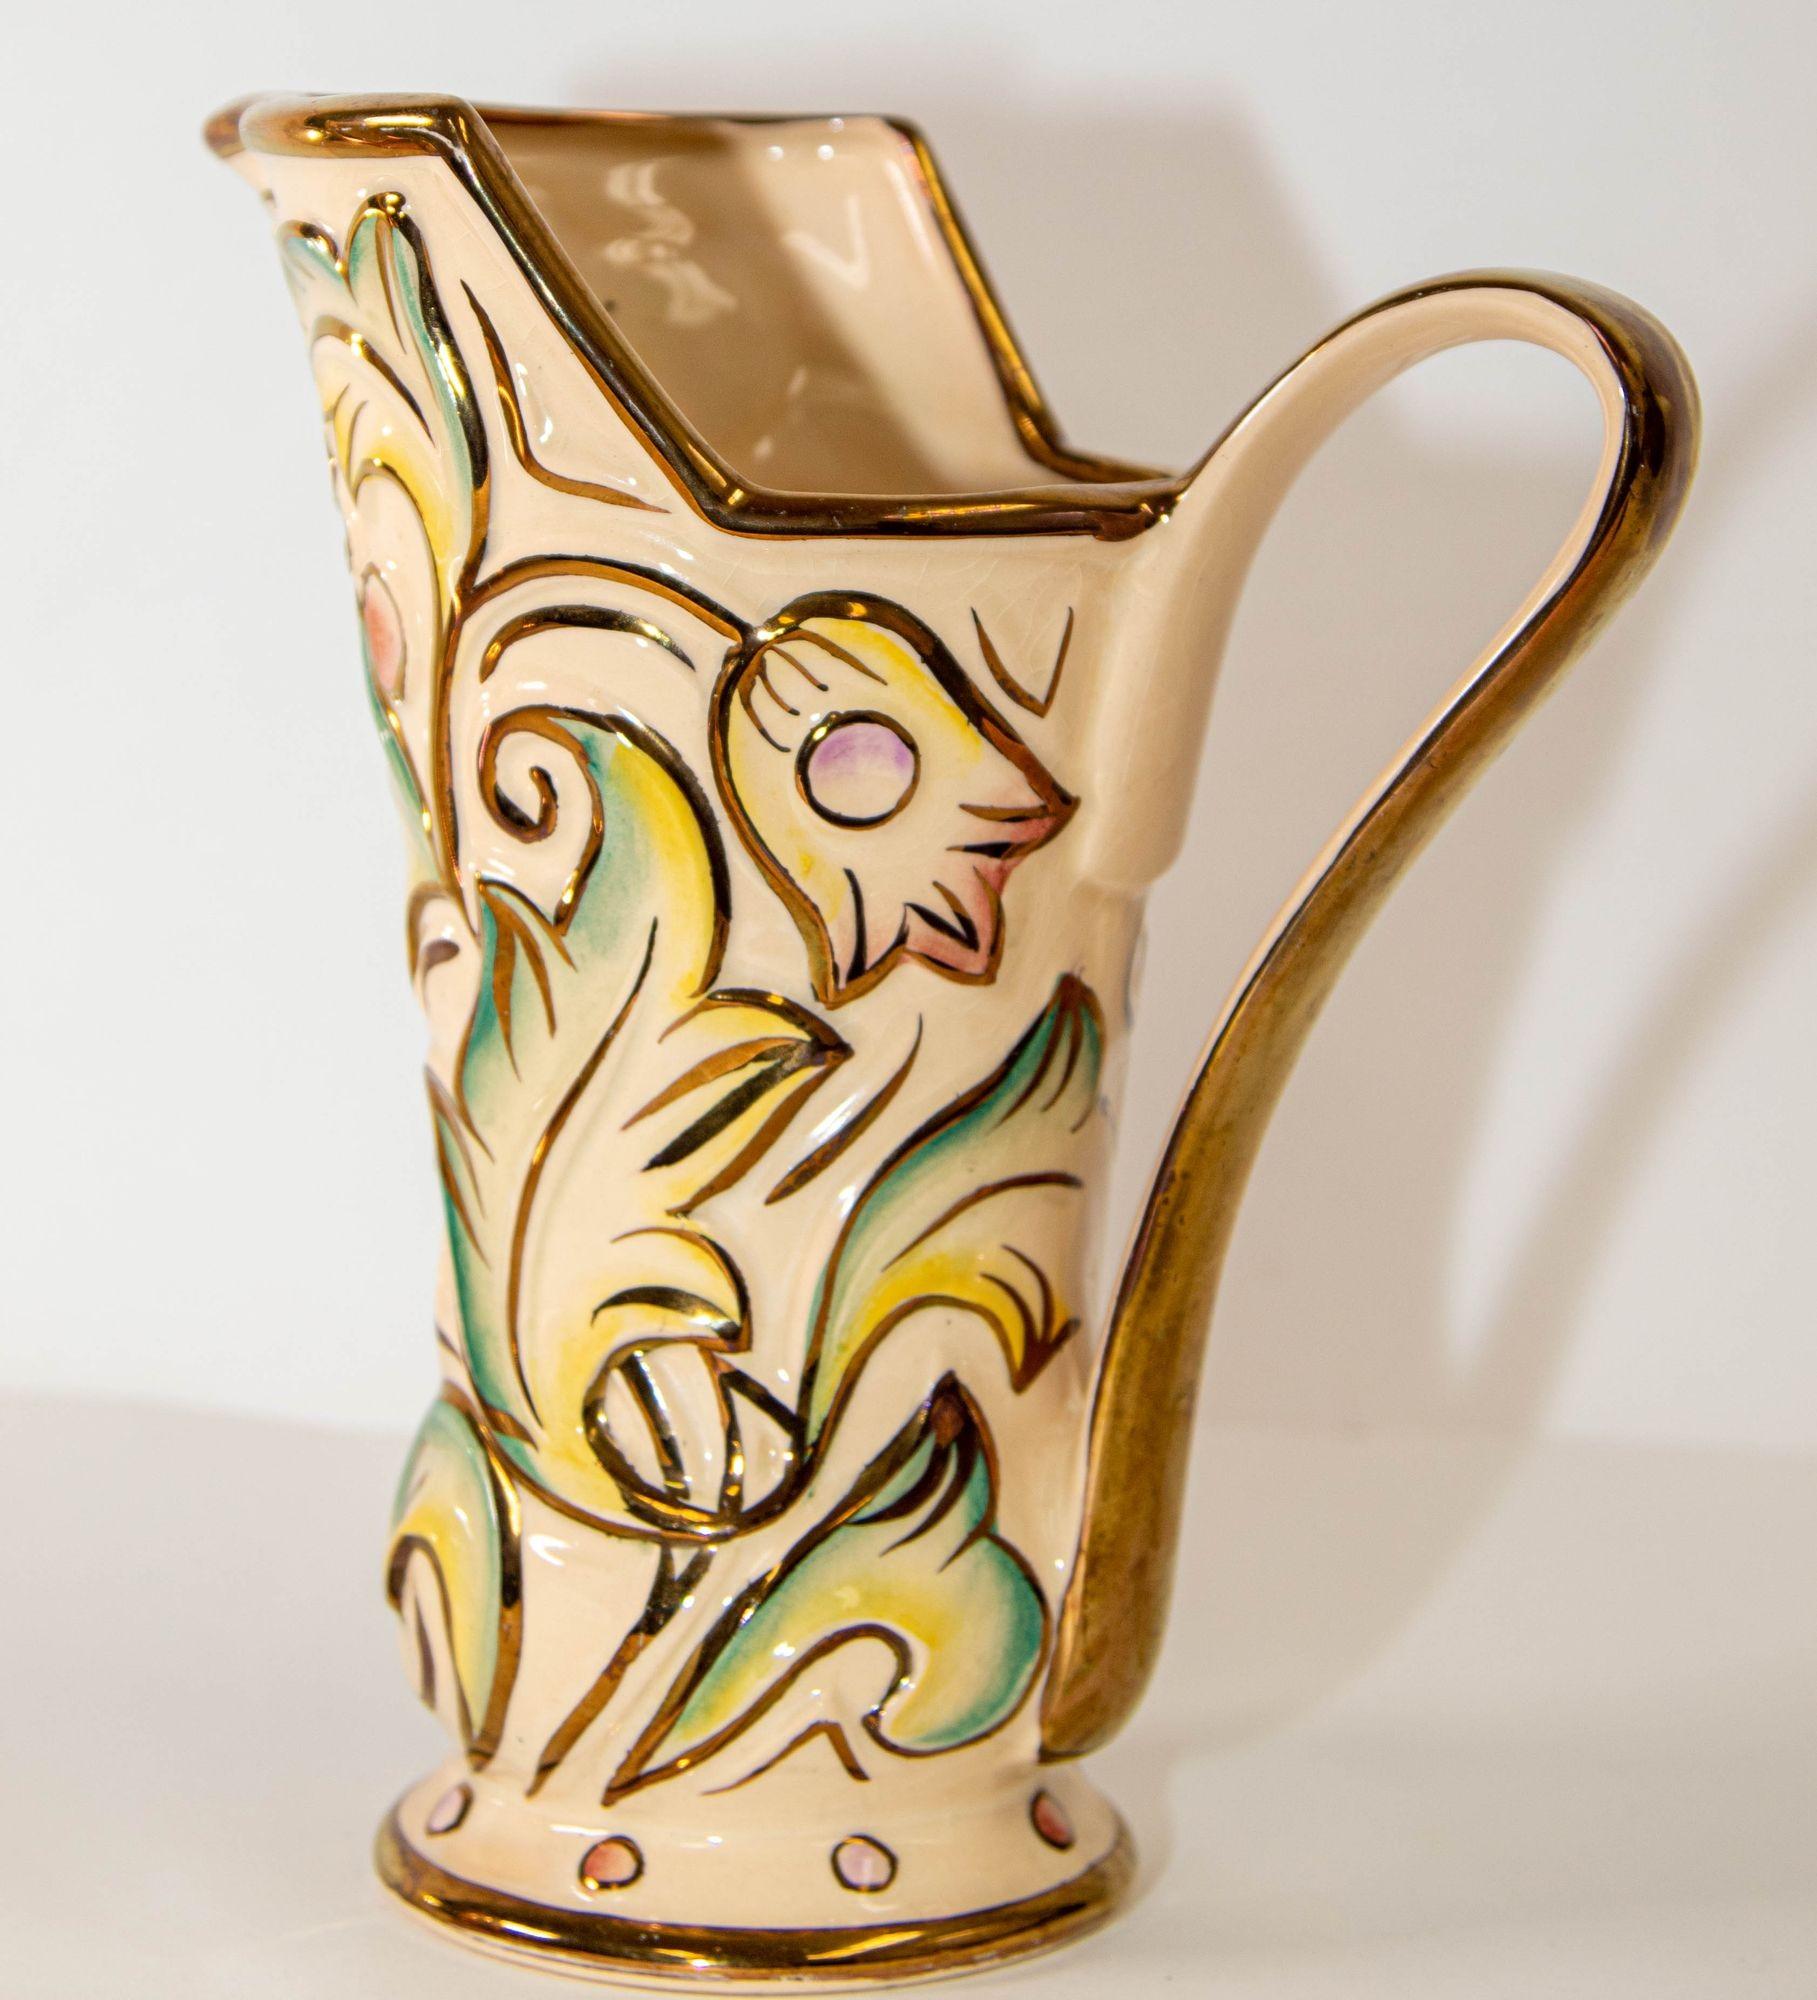 Vintage Wade Made In England Ceramic Gothic Pattern Glazed Vase in Pastel Colors with Gold Rim.
Beautiful Wade Hand Painted Pottery Gothic water jug, handled vase with an elegantly curved body.
The molded design features the 